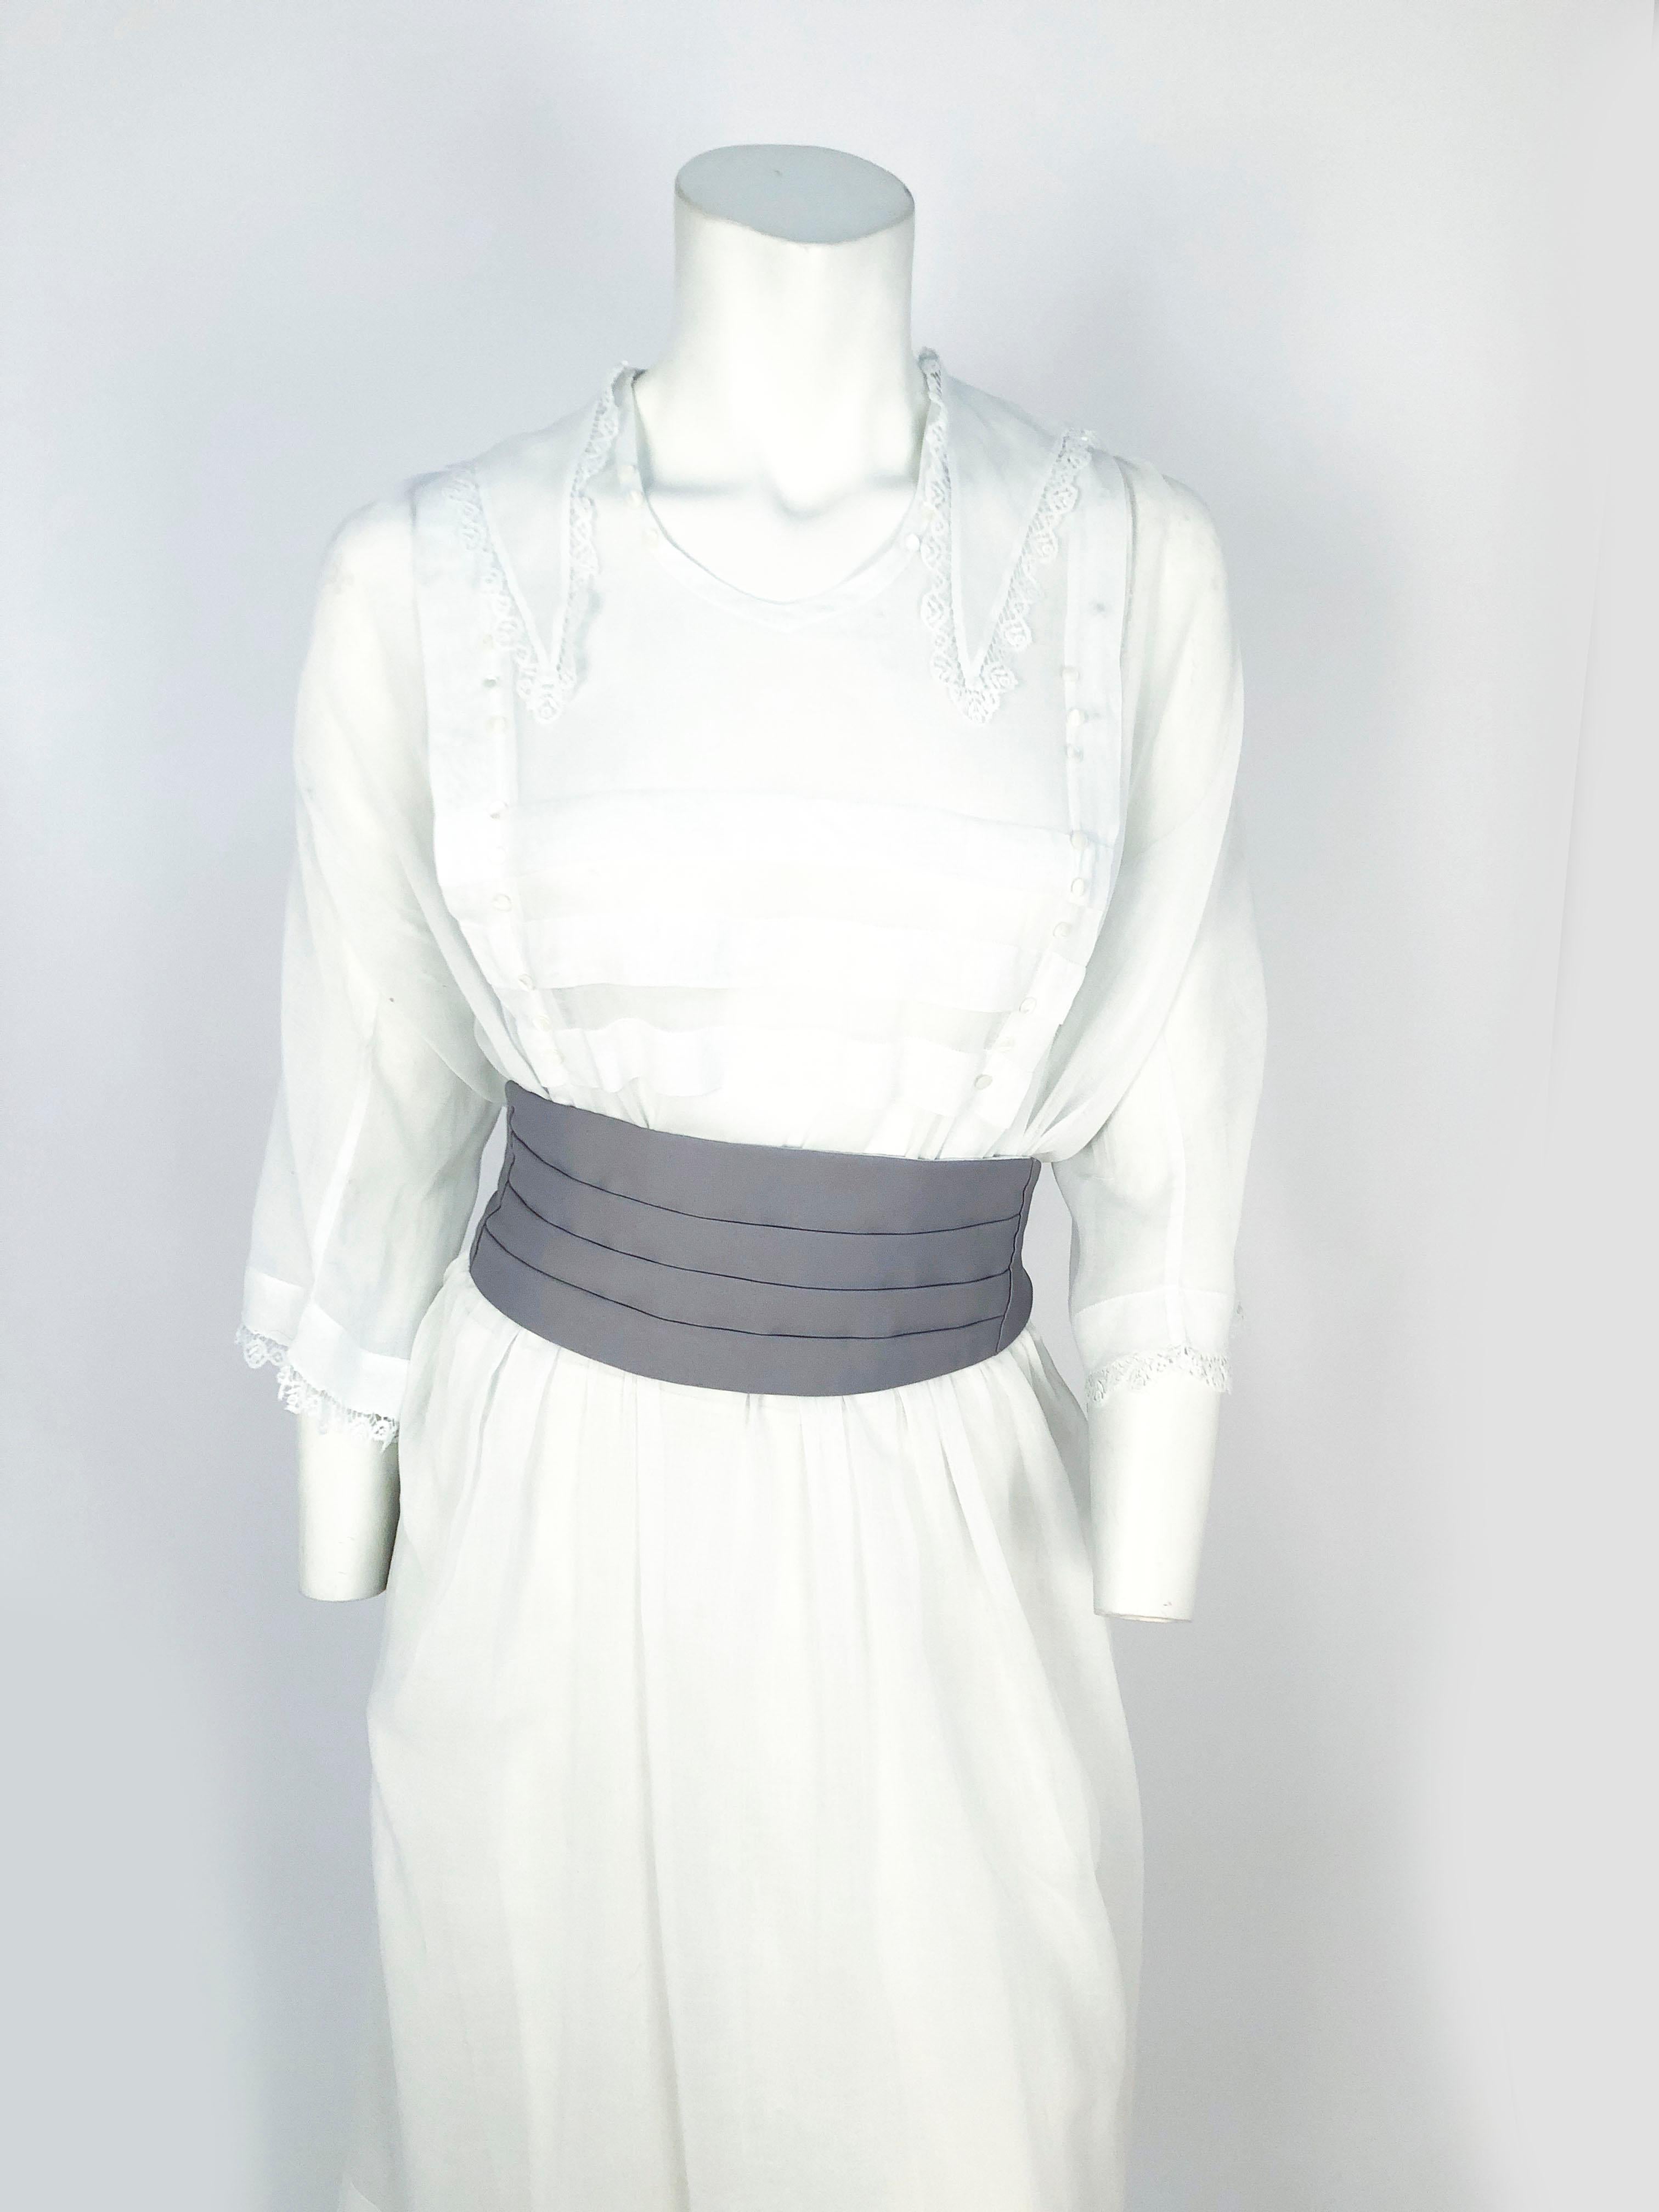 Edwardian white day dress. Made of a fine cotton with lace trim around the sleeves and the enlarged sailor collar. The bodice is adorned with wide pleats and seashell buttons. The waistline is gathered and the hemline is bordered with wide pleats.